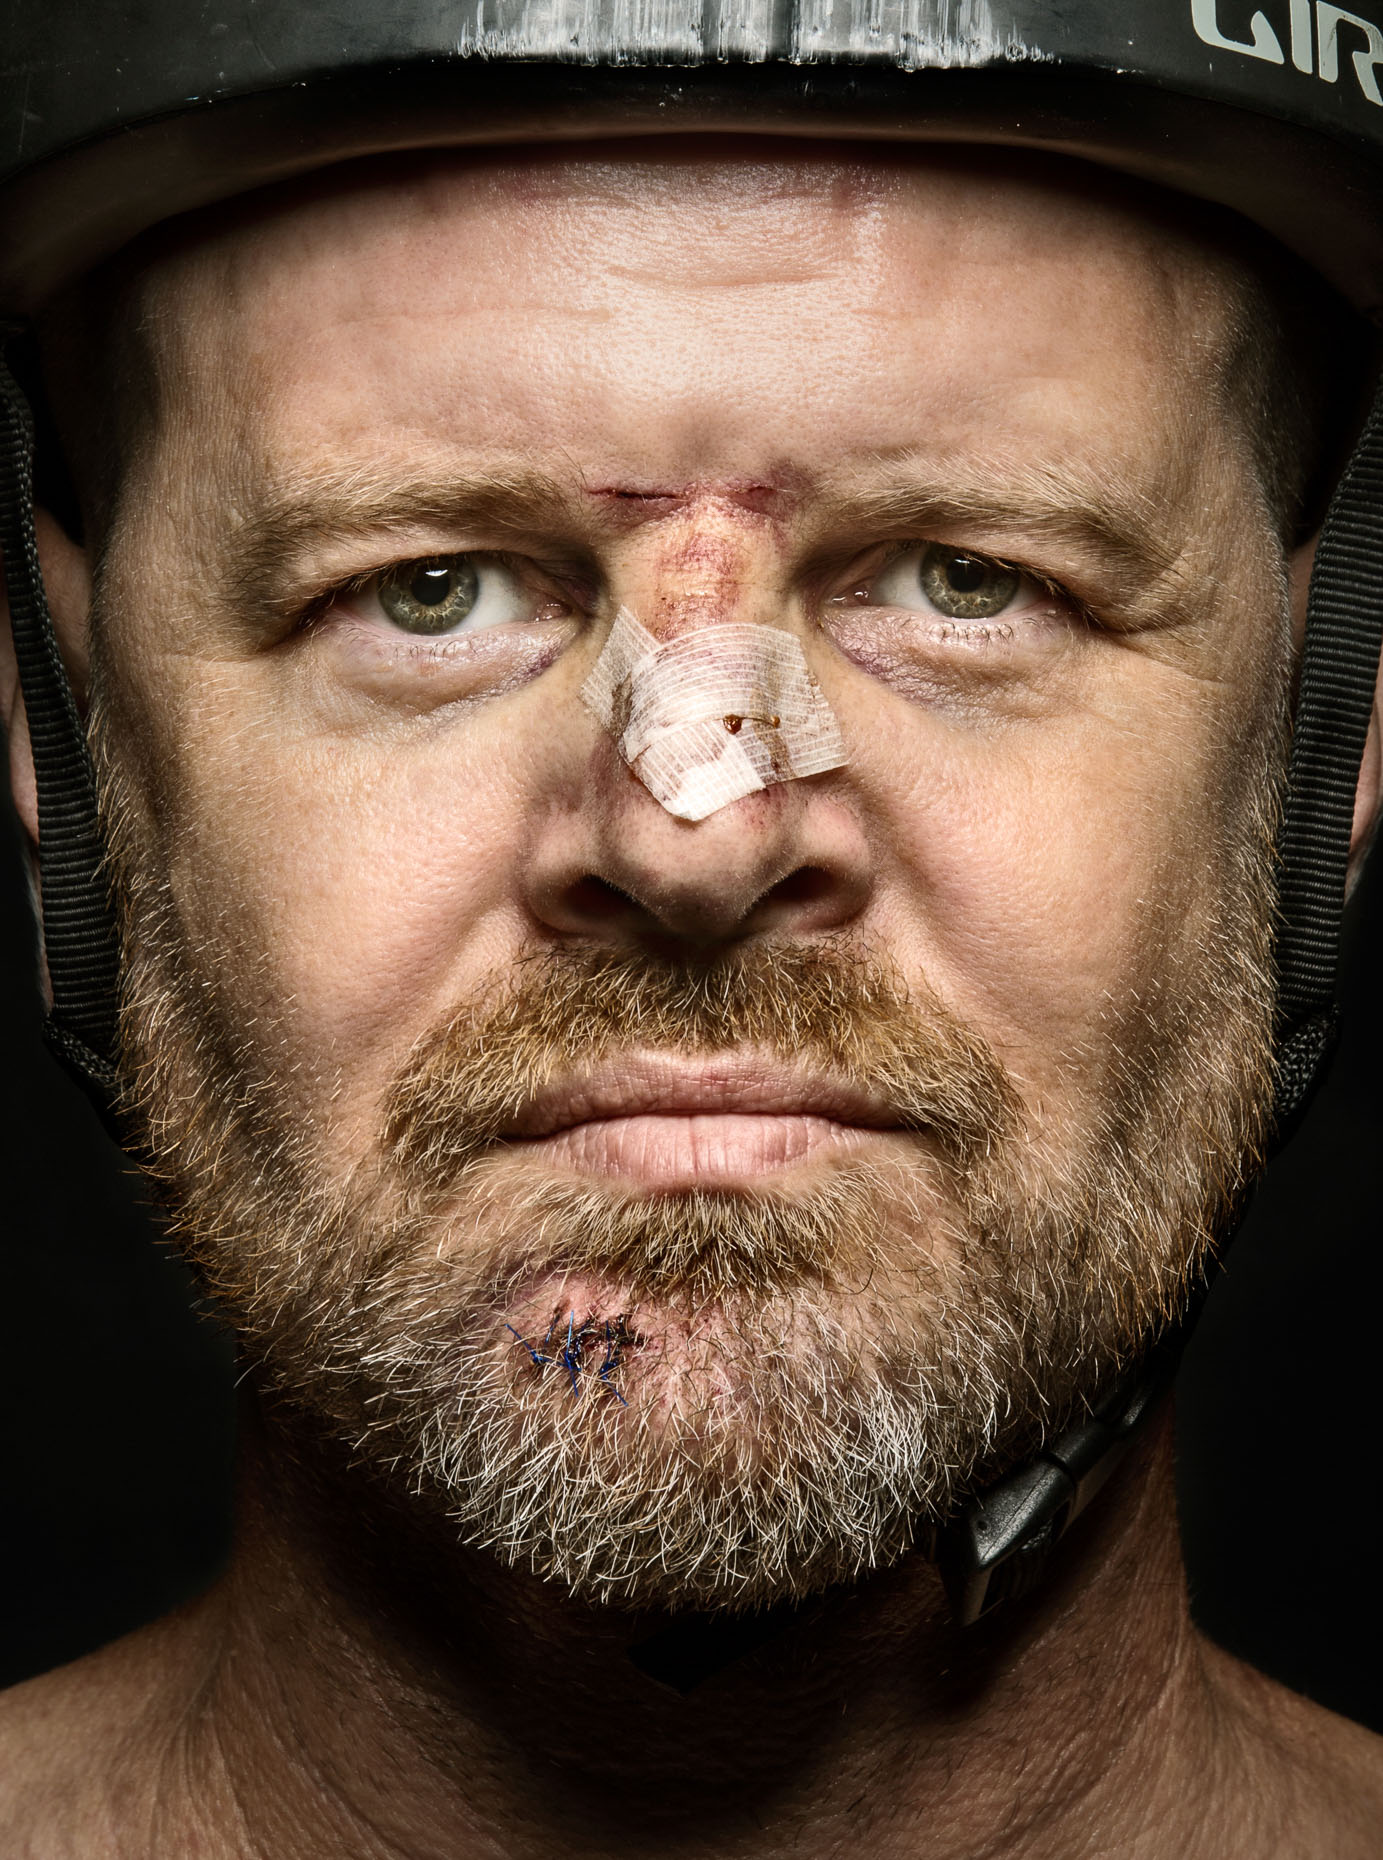 Self portrait one day after being hit by a car on my bicycle, showing the Giro bike helmet that saved my frontal lobe. Brett Deering Photography